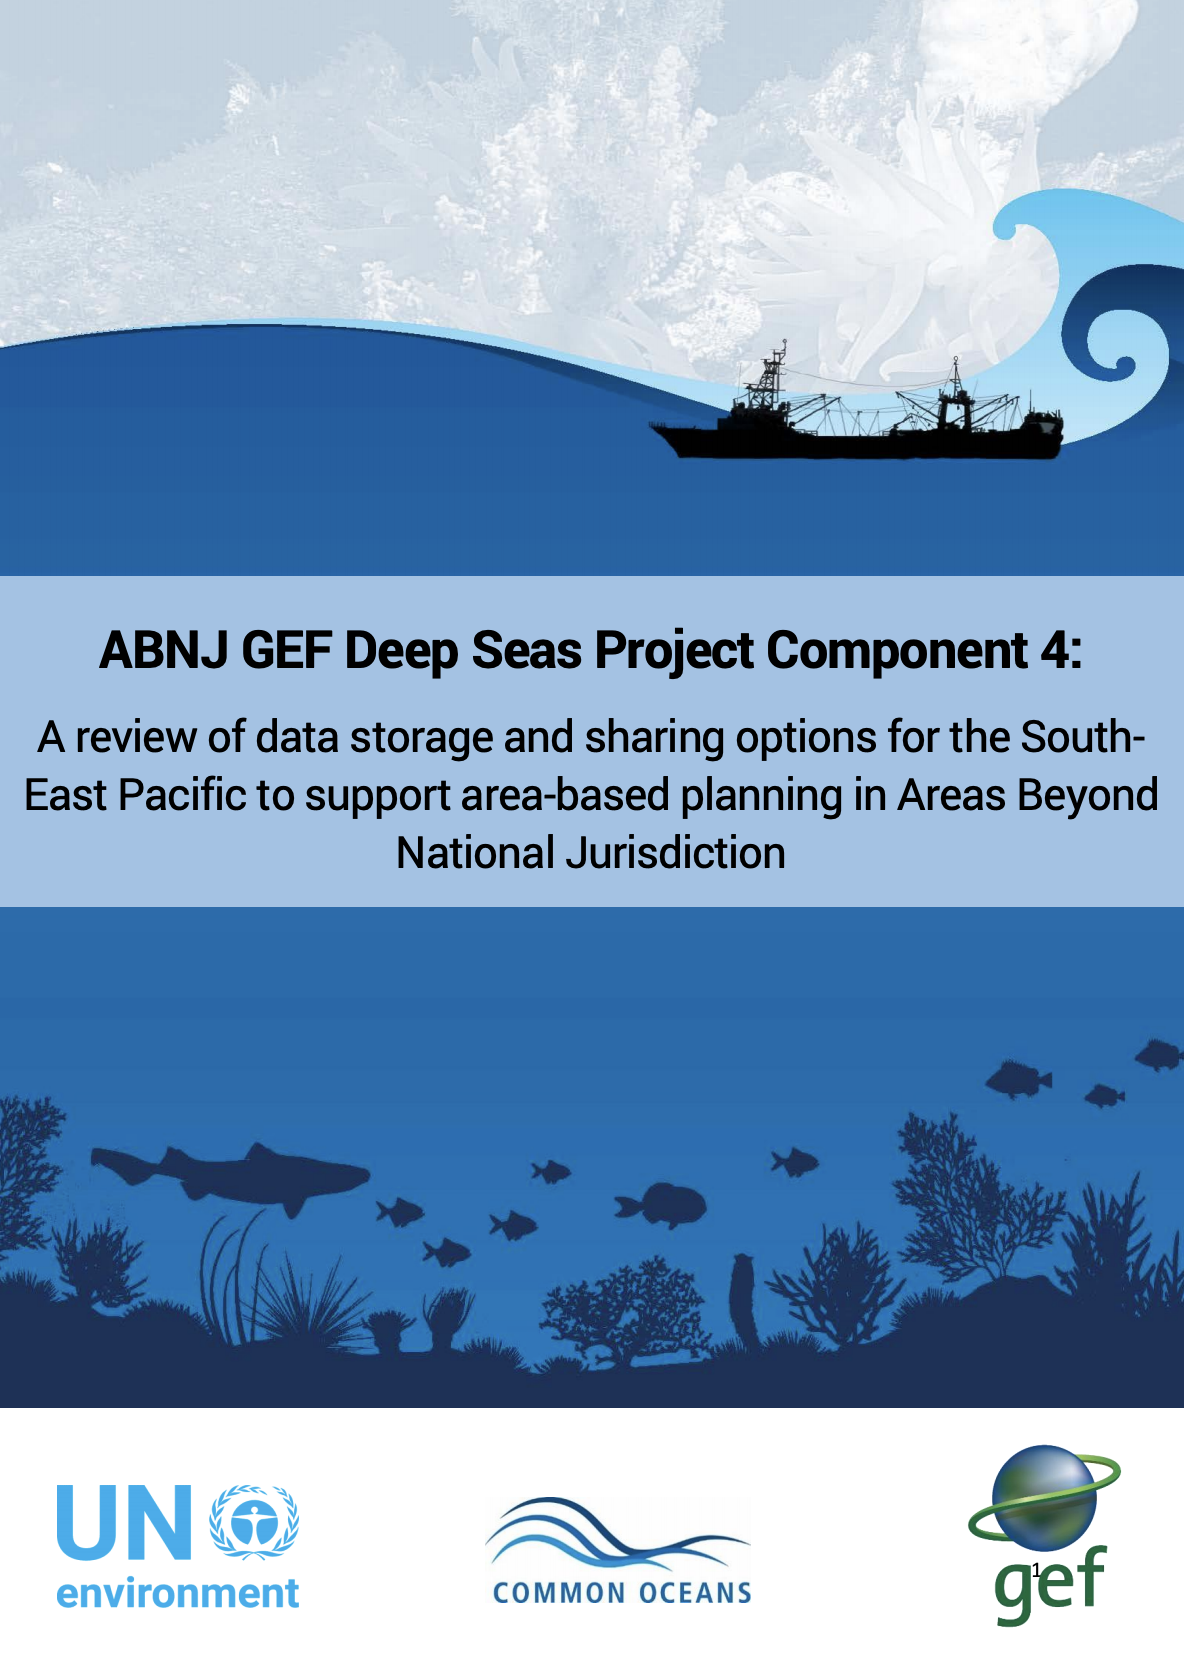 A review of data storage and sharing options for the SouthEast Pacific to support area-based planning in Areas Beyond National Jurisdiction